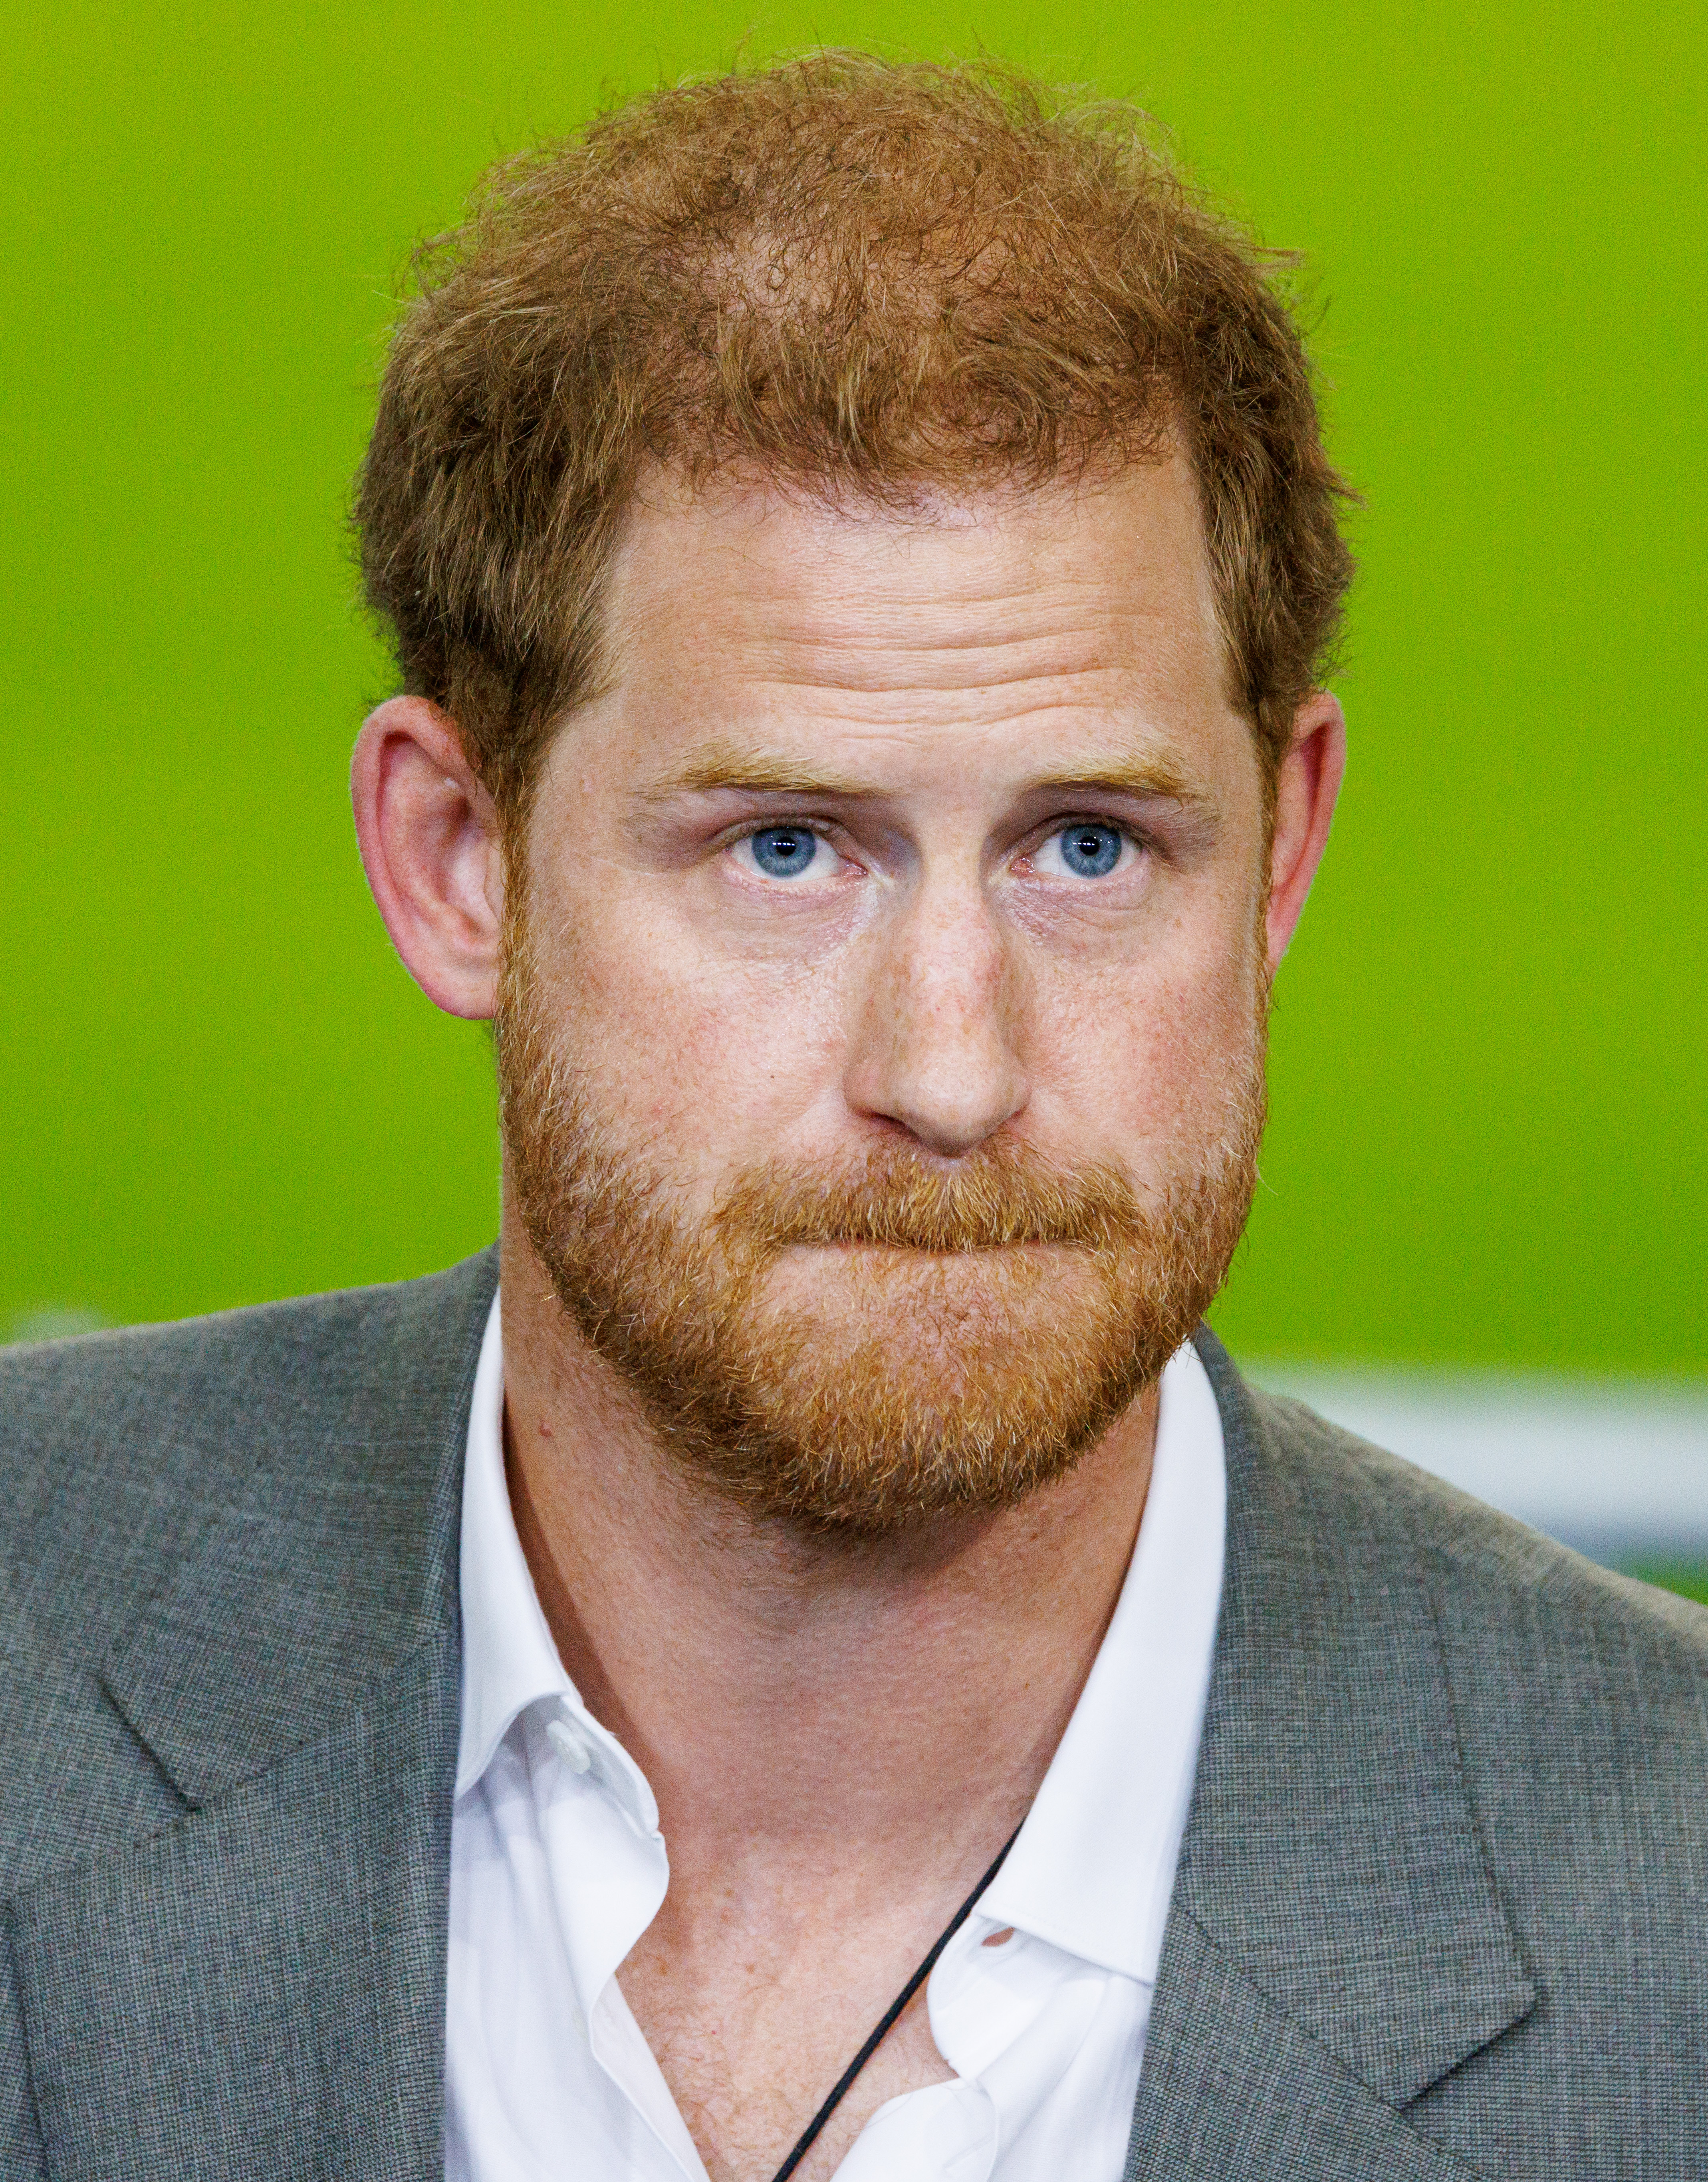 Prince Harry attends a press conference at the Merkur Spiel Arena on September 6, 2022 in Dusseldorf, Germany. | Source: Getty Images